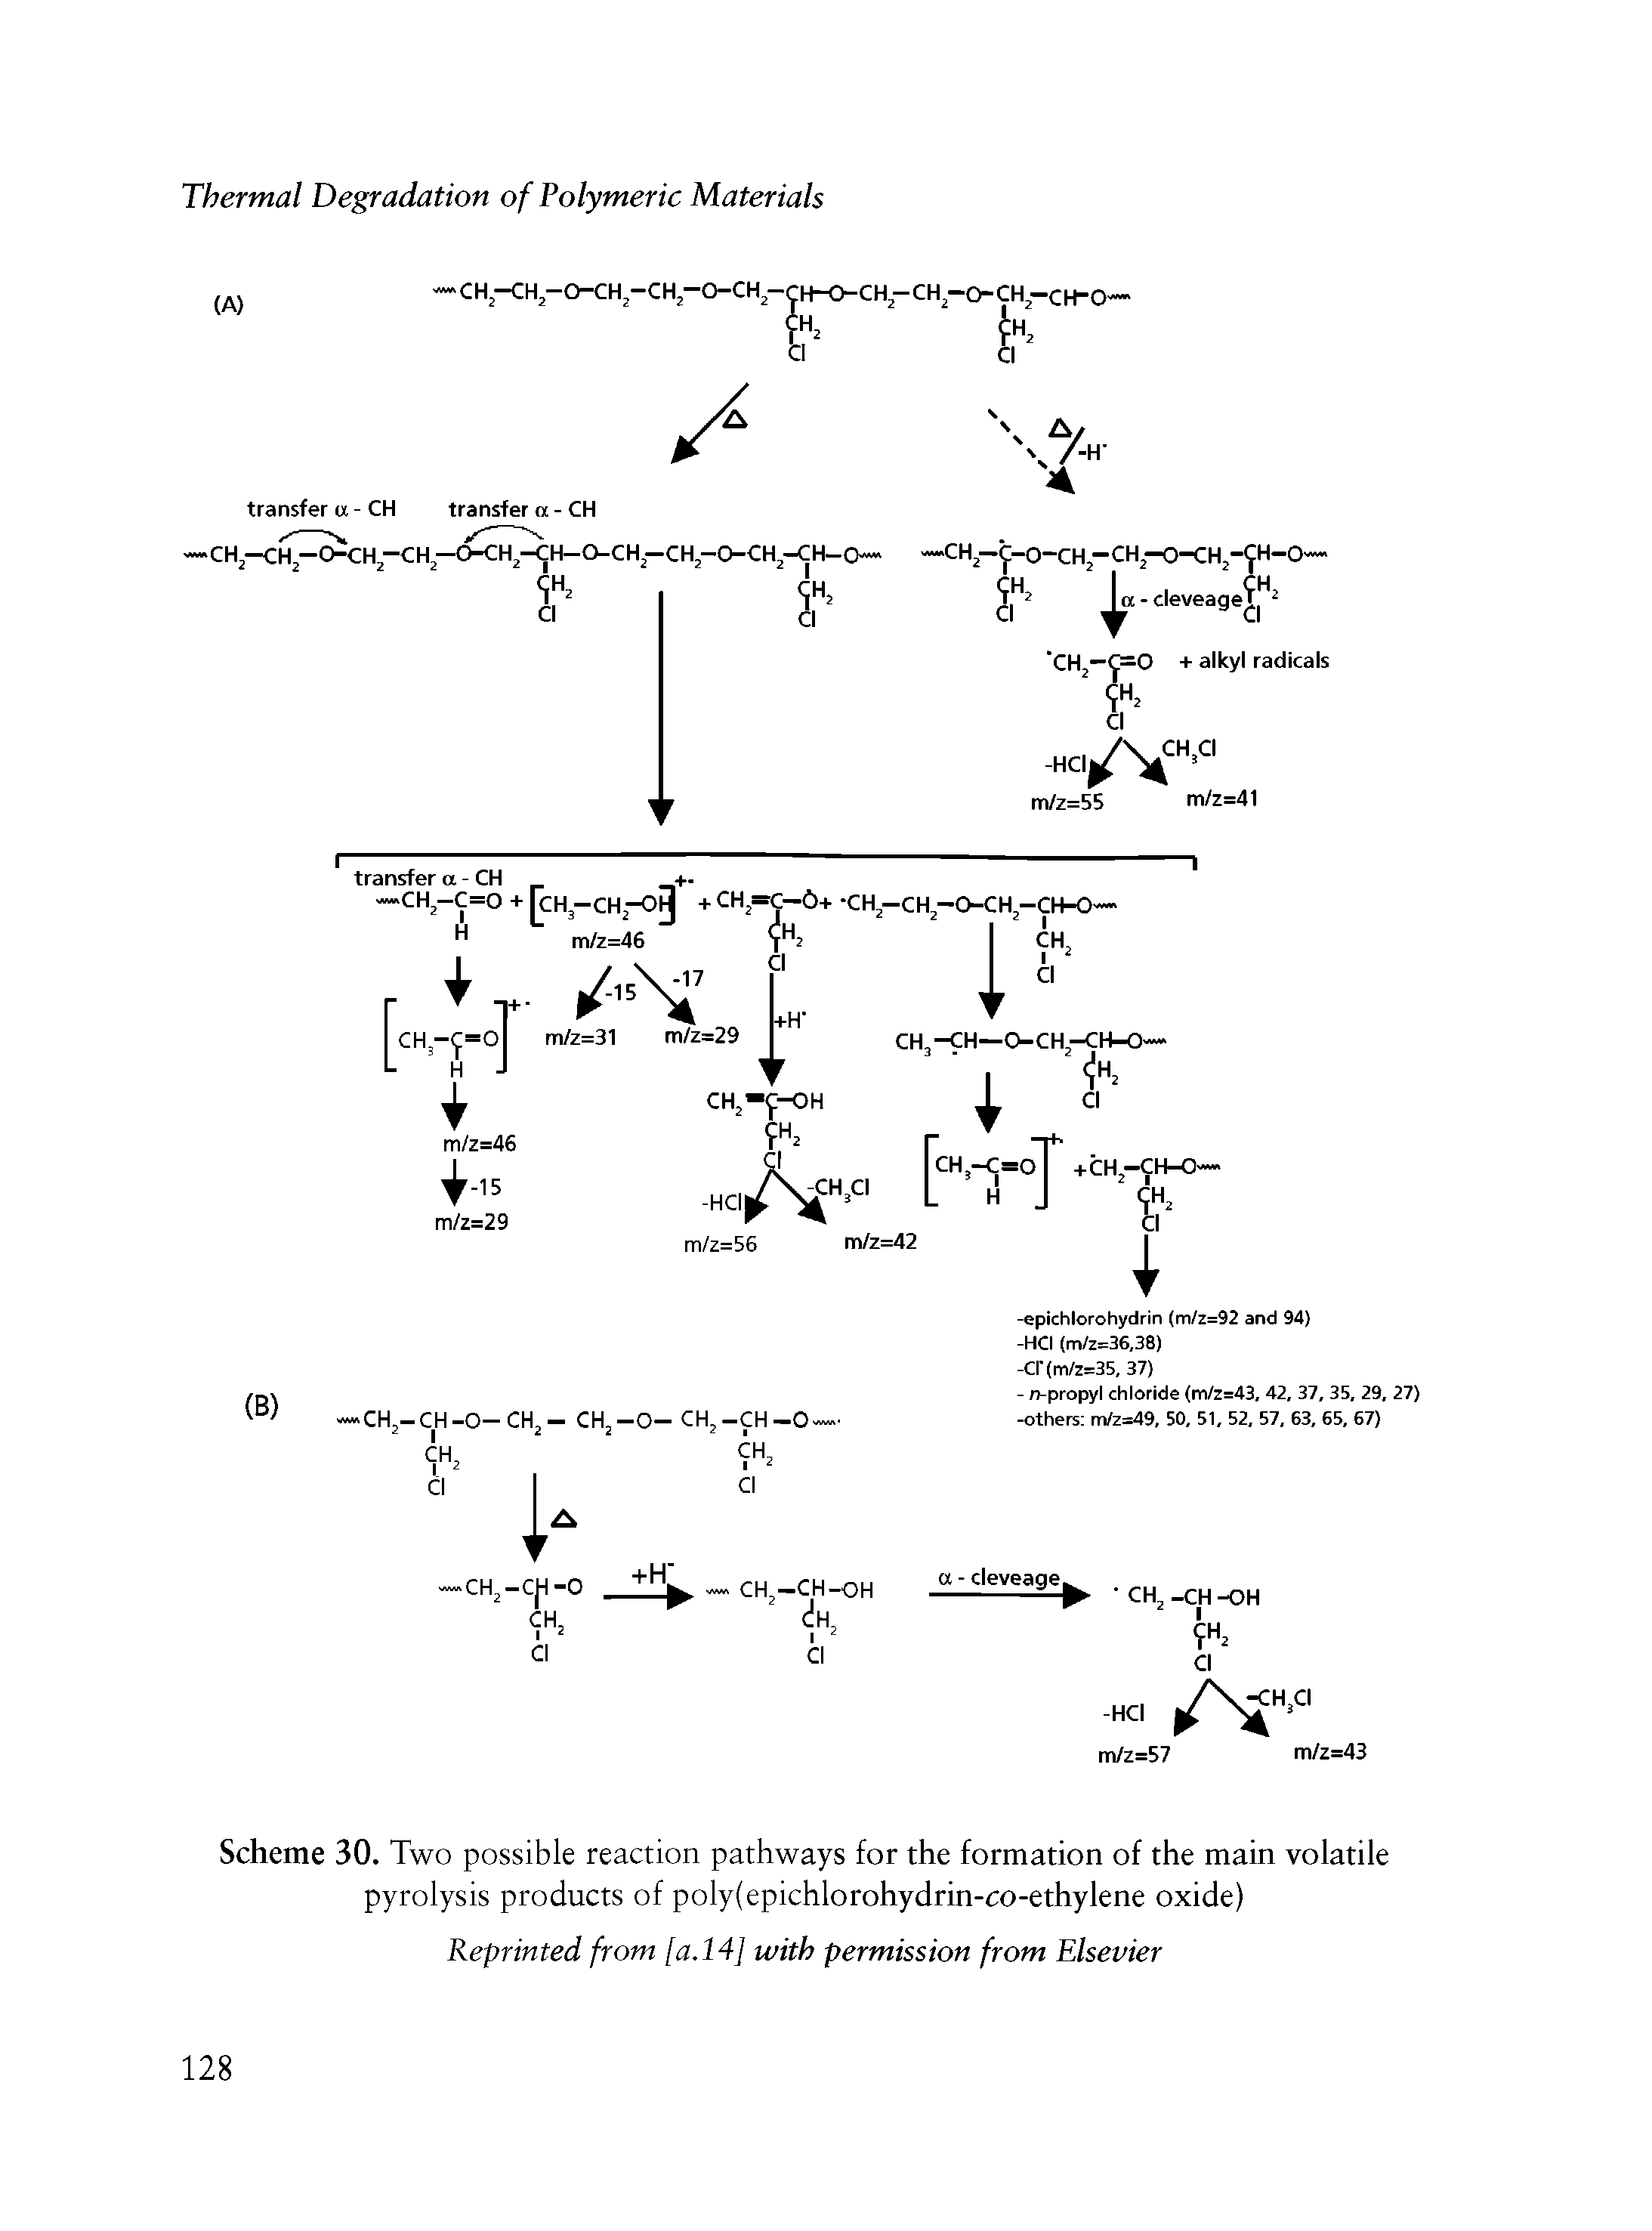 Scheme 30. Two possible reaction pathways for the formation of the main volatile pyrolysis products of poly(epichlorohydrin-co-ethylene oxide)...